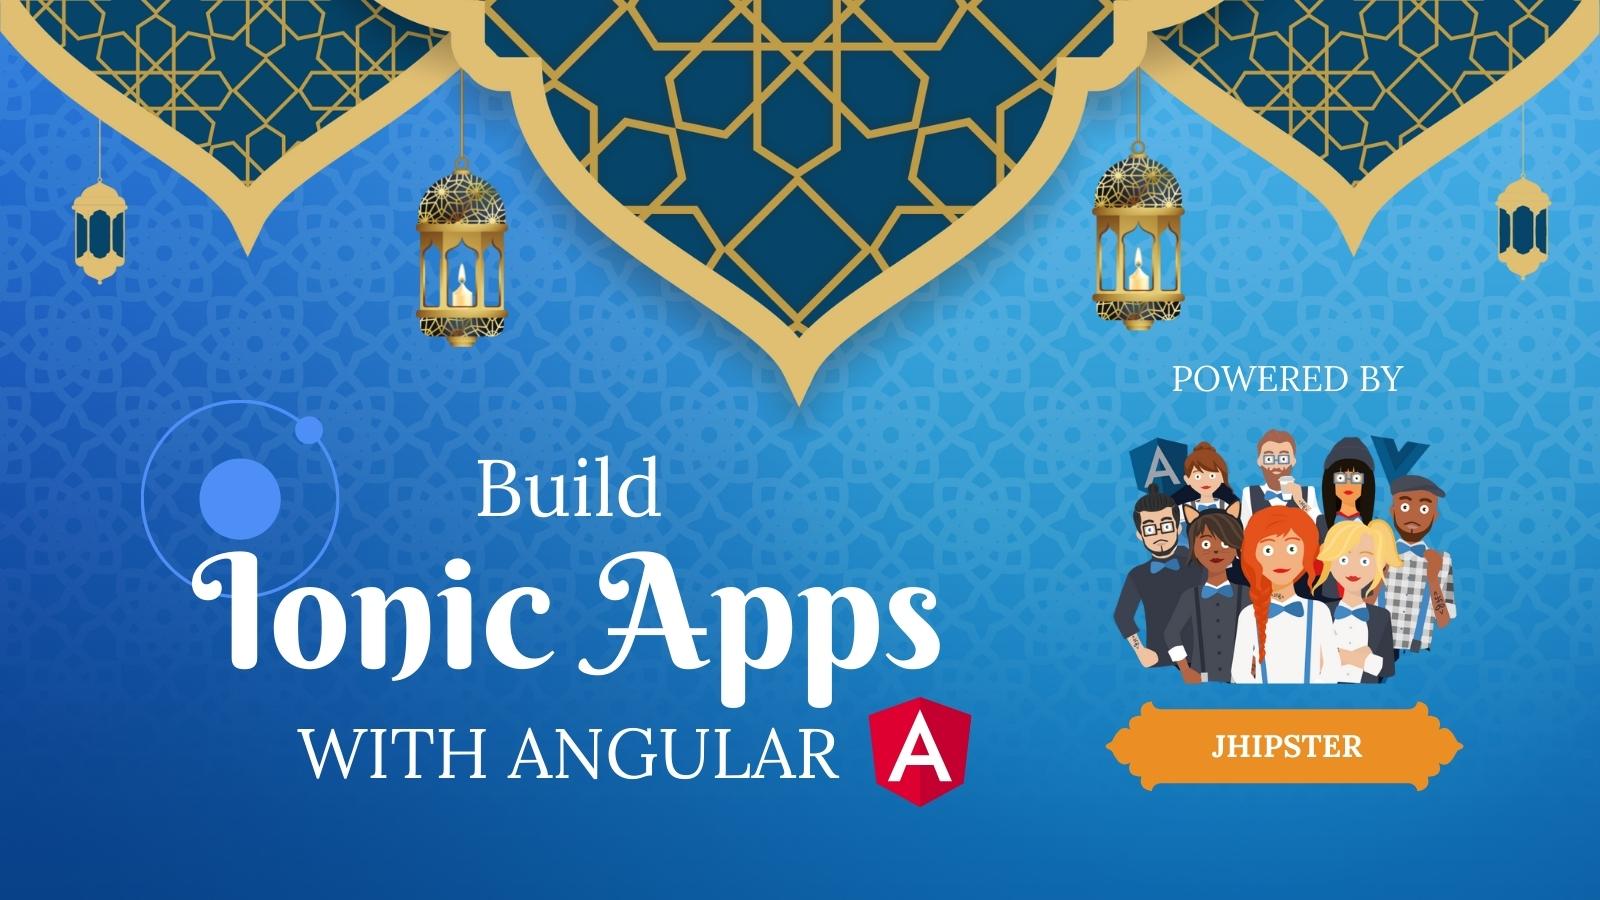 Build Secure Ionic Apps with Angular and JHipster